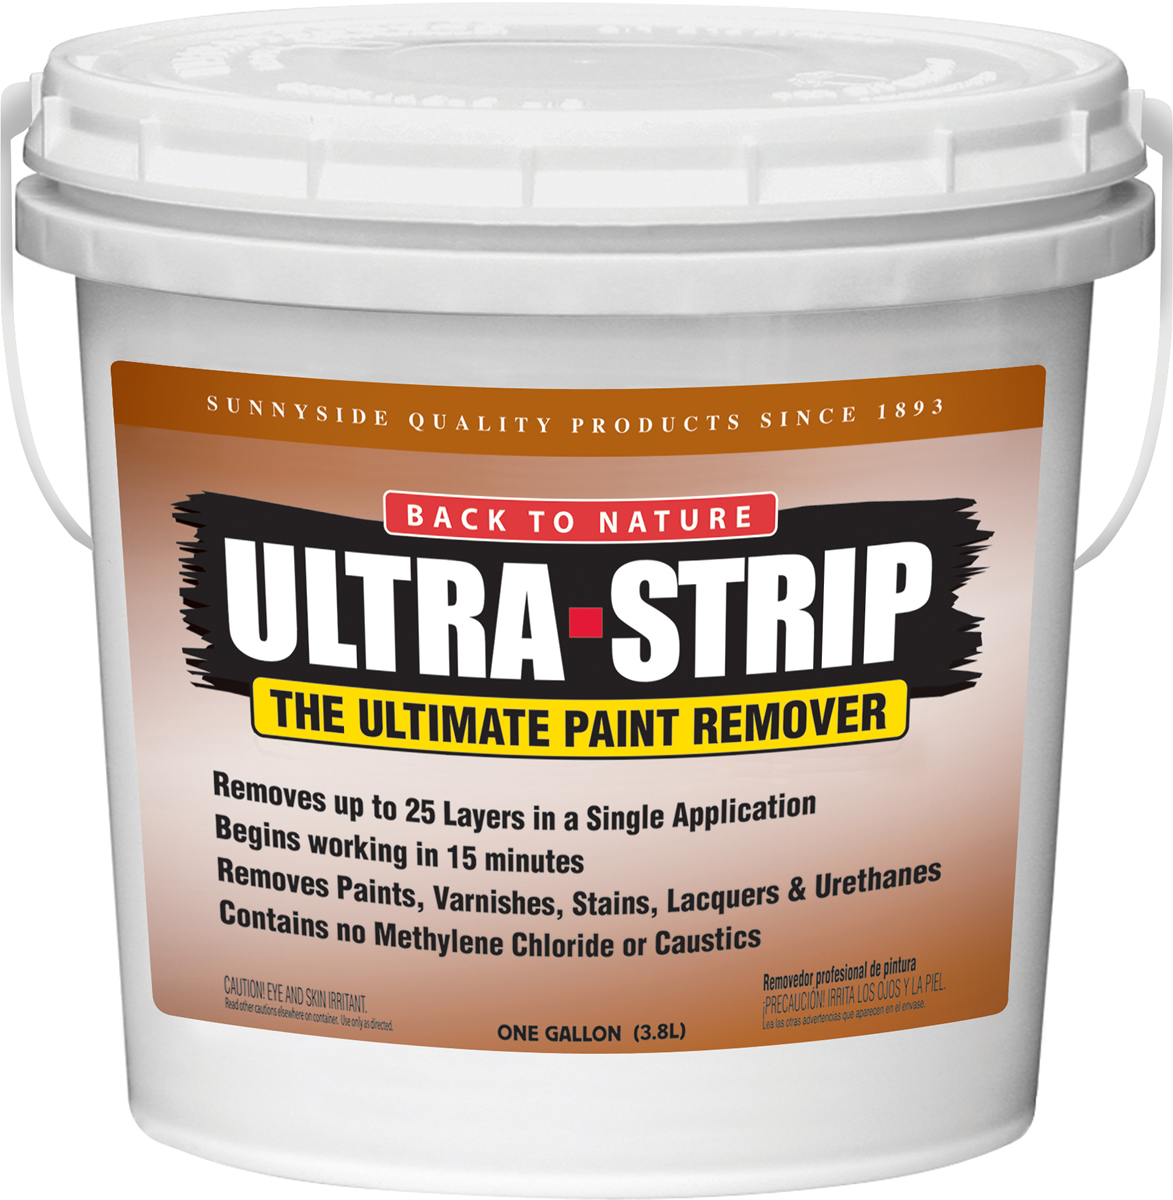 BACK TO NATURE ULTRA-STRIP Product Image